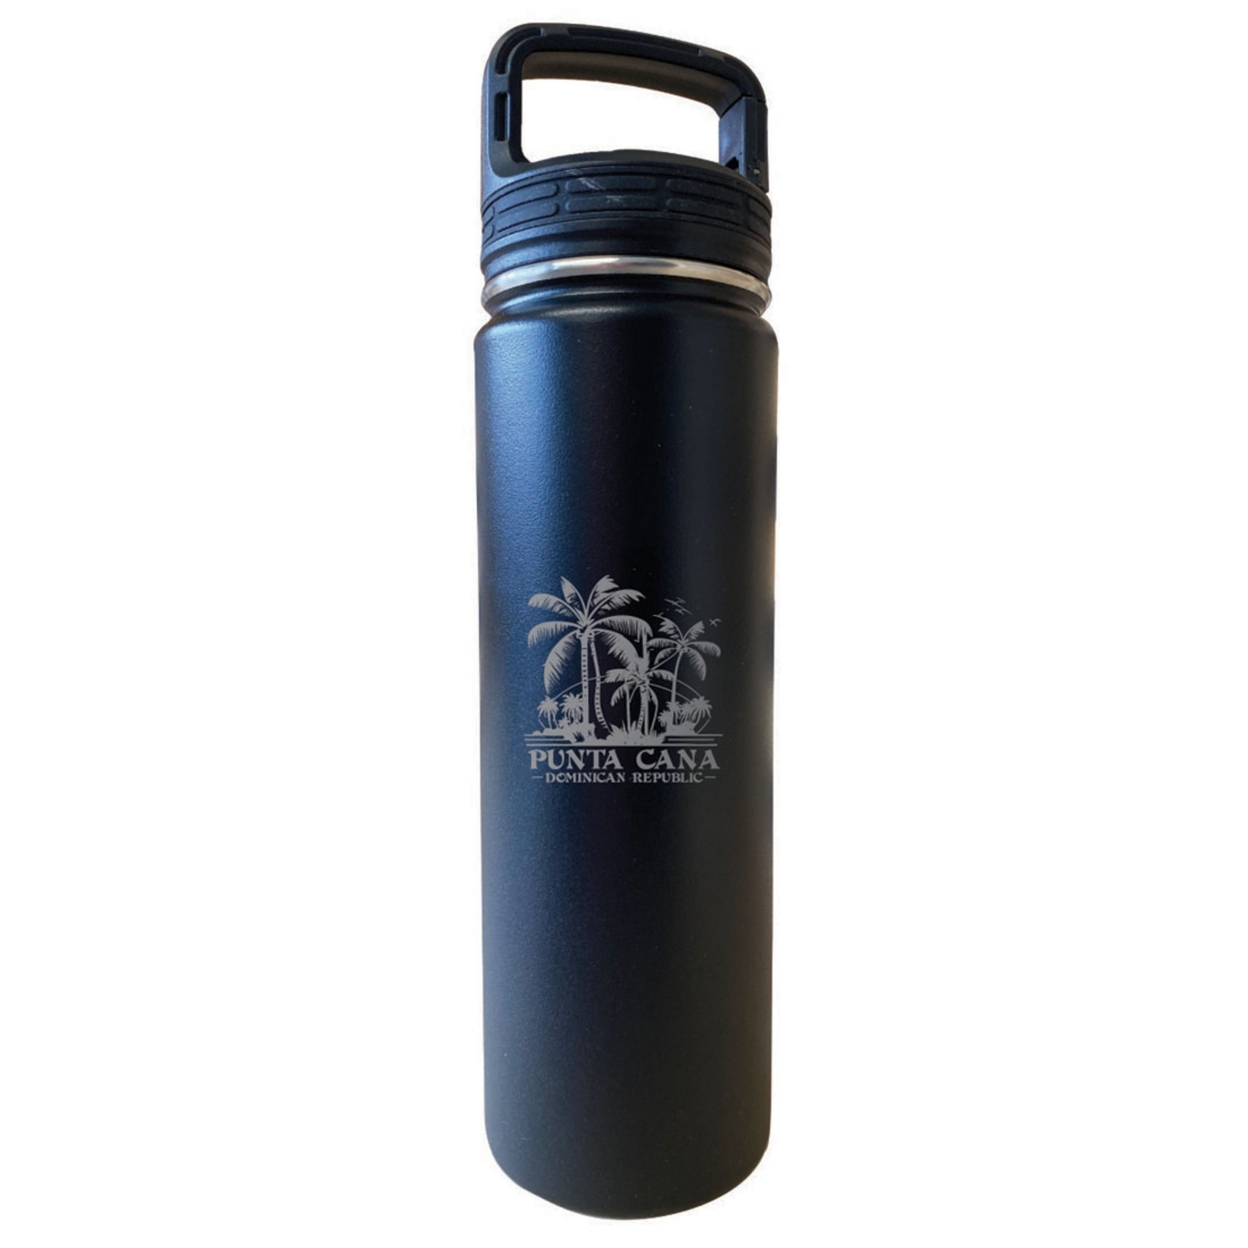 Punta Cana Dominican Republic Souvenir 32 Oz Insulated Stainless Steel Tumbler - Black, Parrot